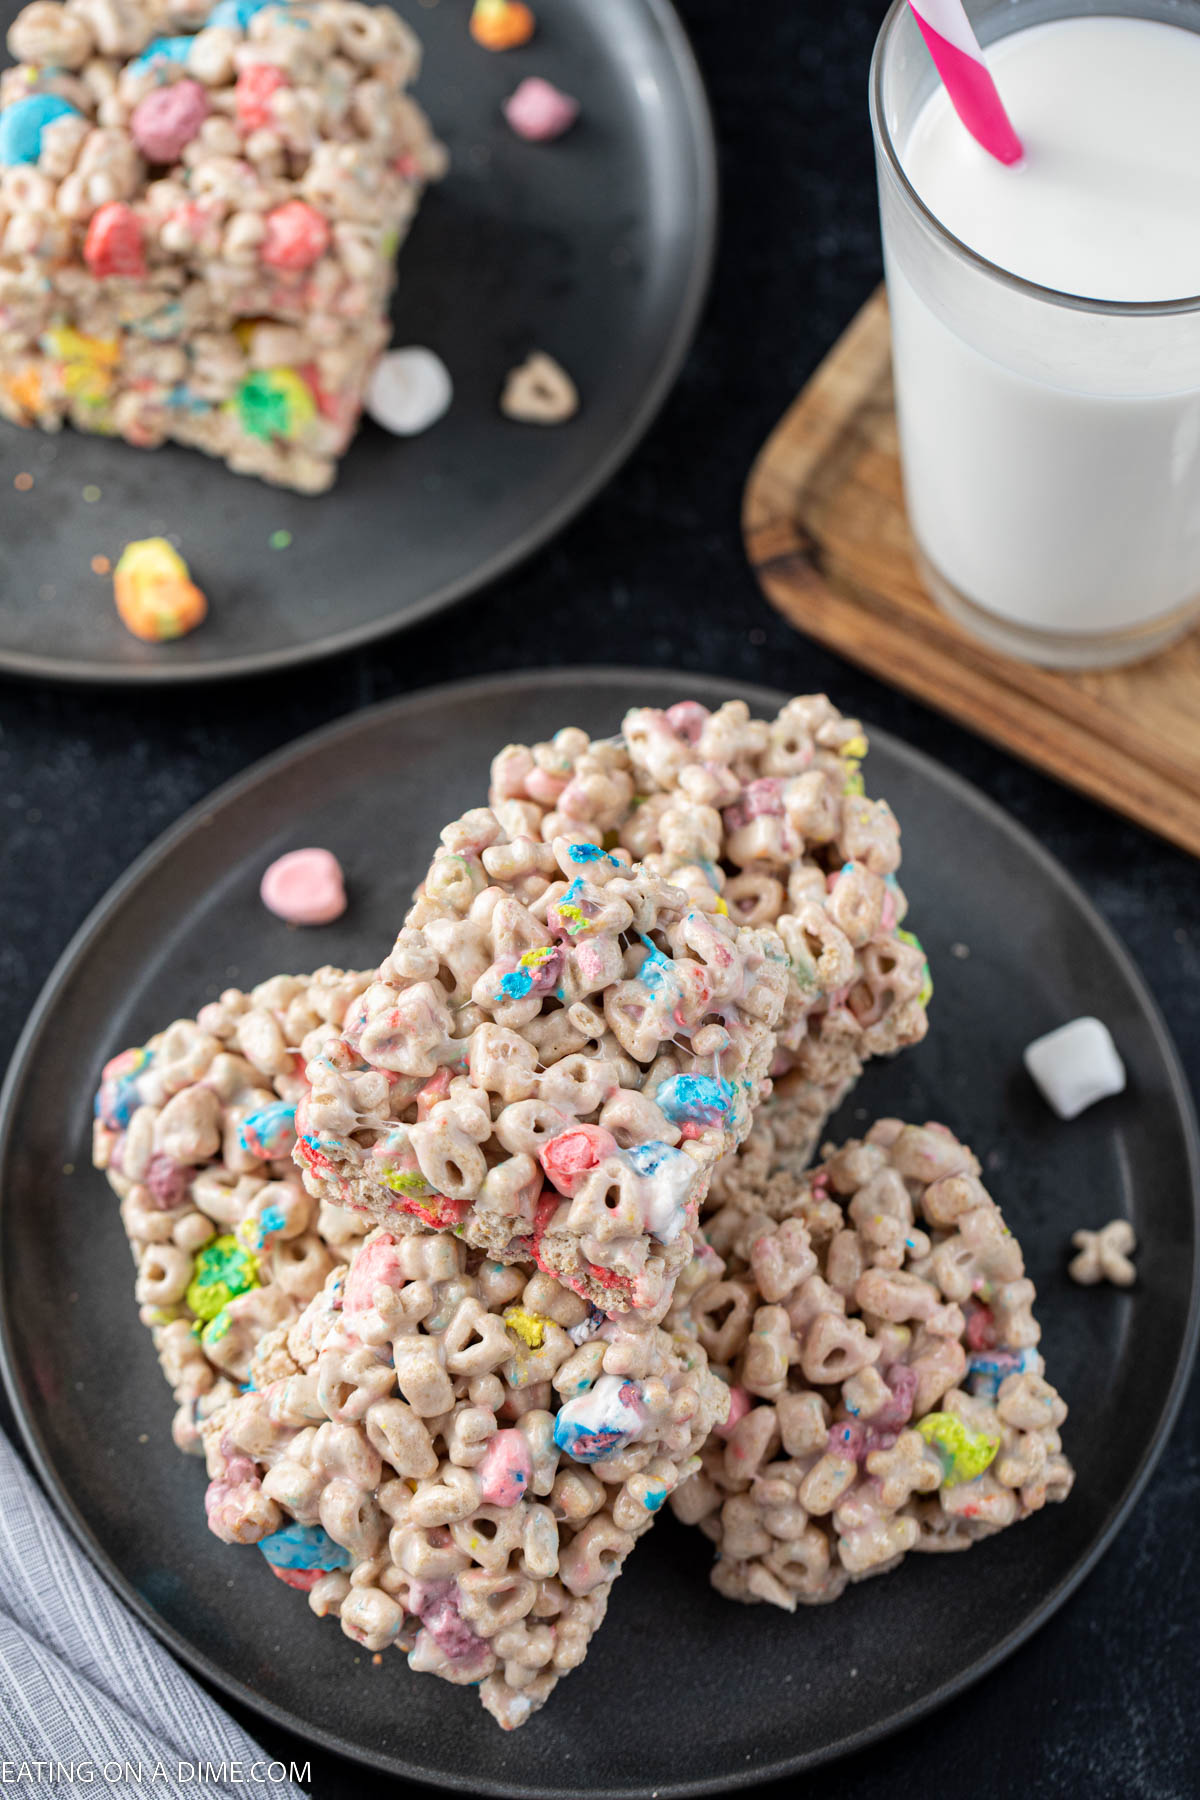 Why This Nutritionist Is OK With Her Kids Eating Lucky Charms